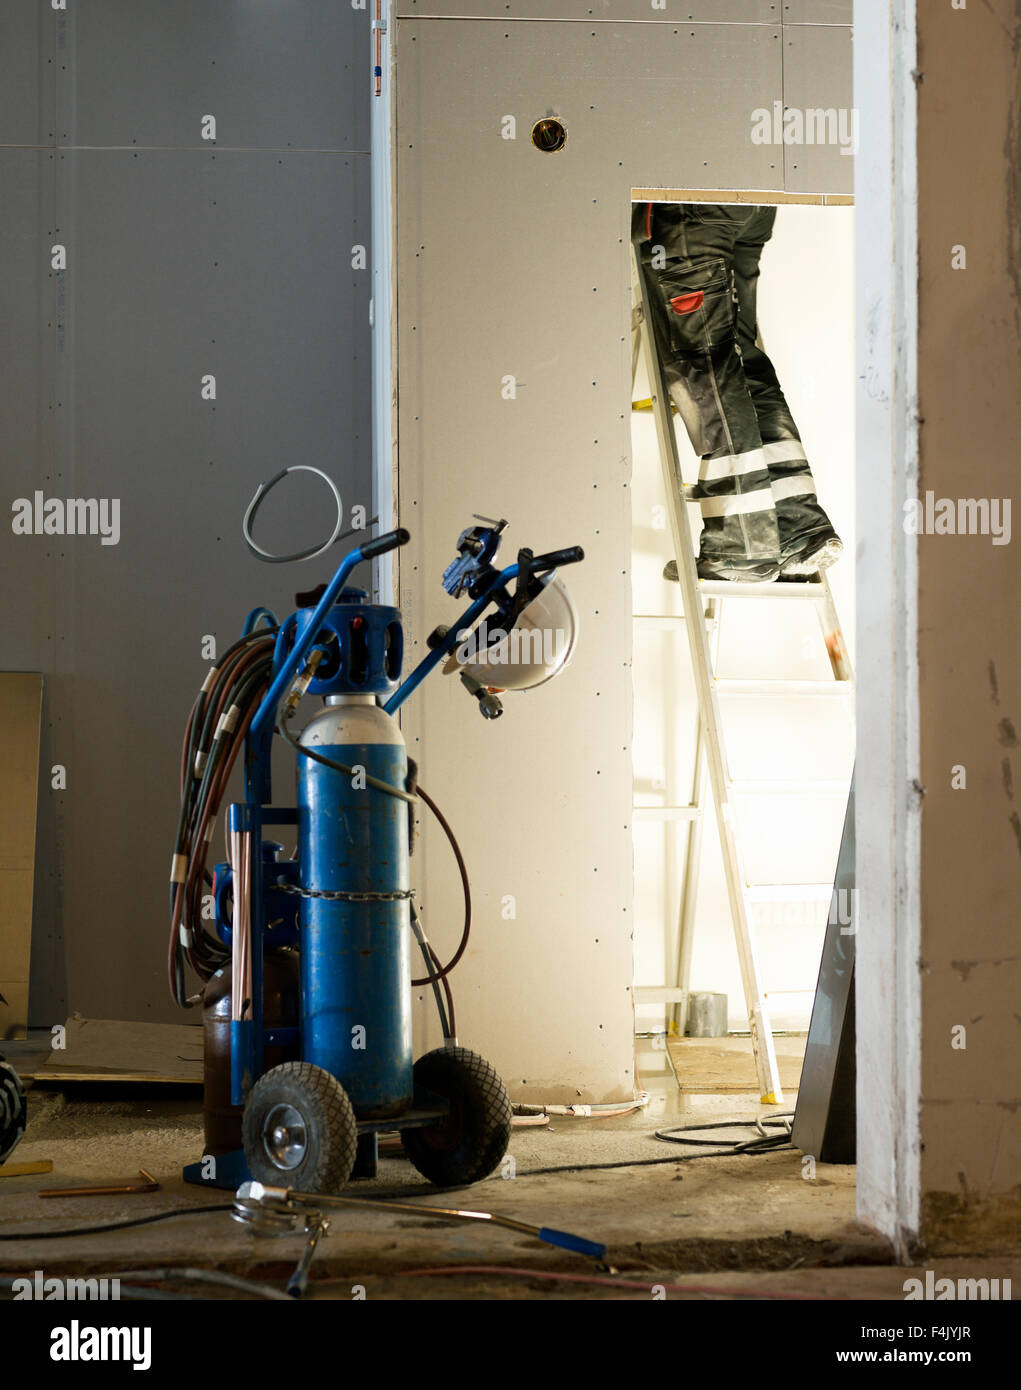 Man standing on ladder with work tool Stock Photo